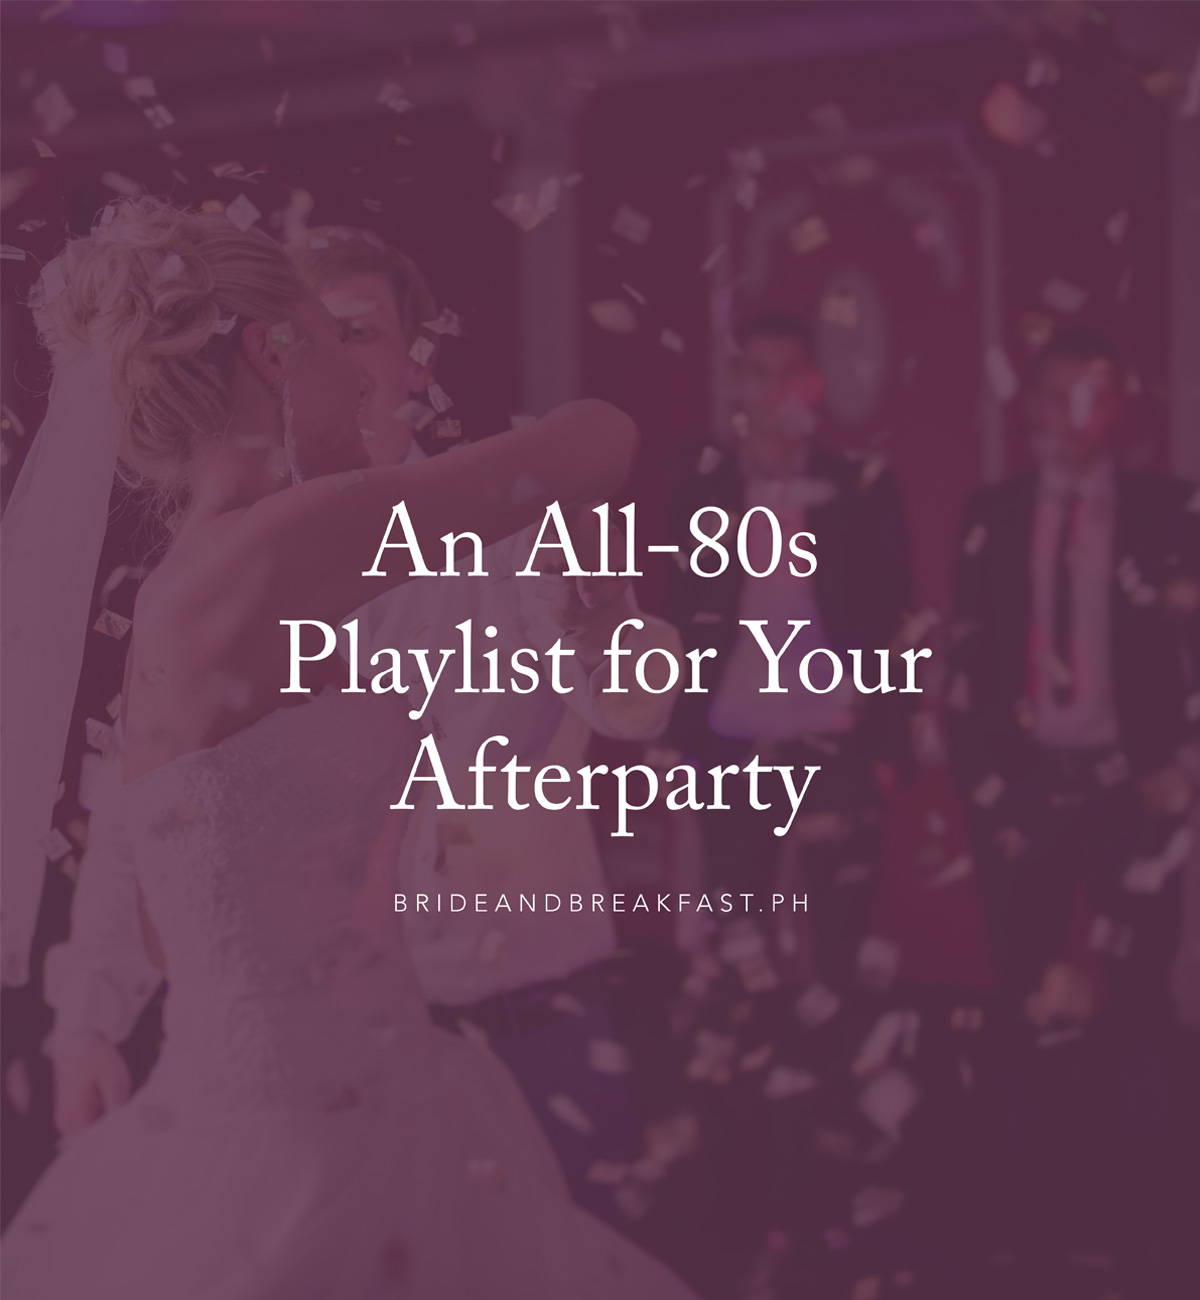 An All-80s Playlist for Your Afterparty